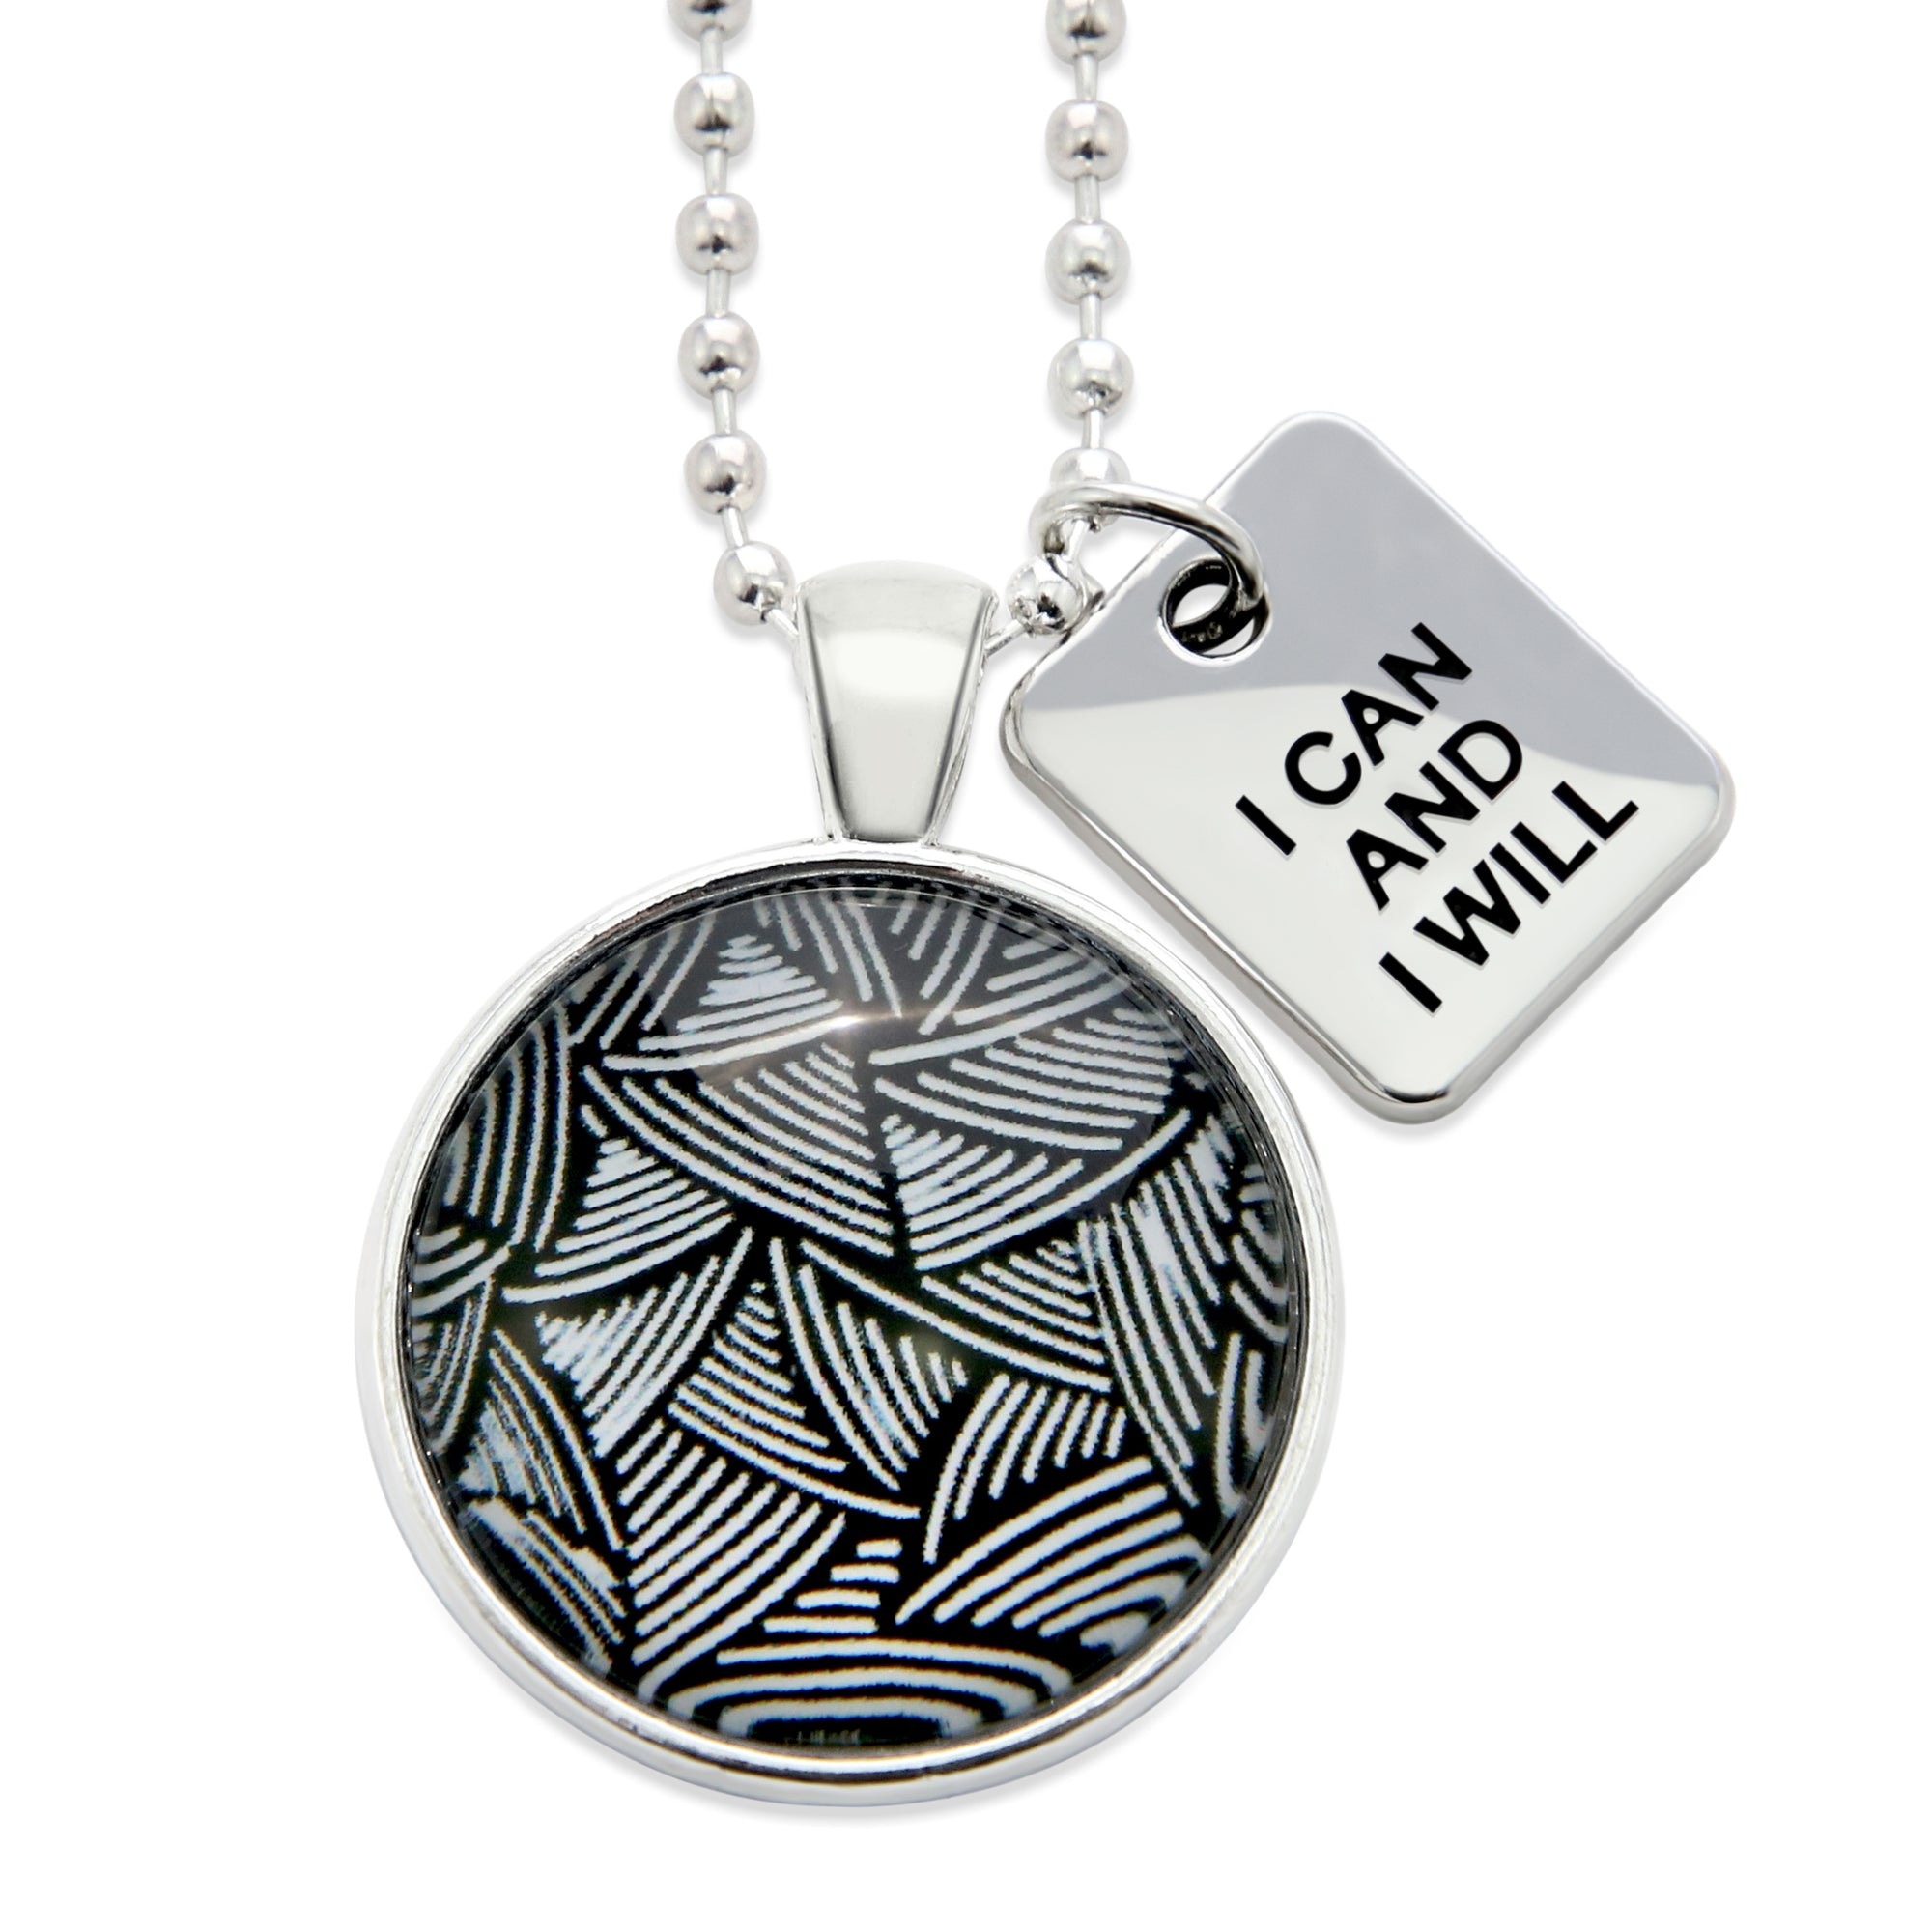 Black & White Collection - Bright Silver 'I CAN AND I WILL' Necklace - Scratch (11224)